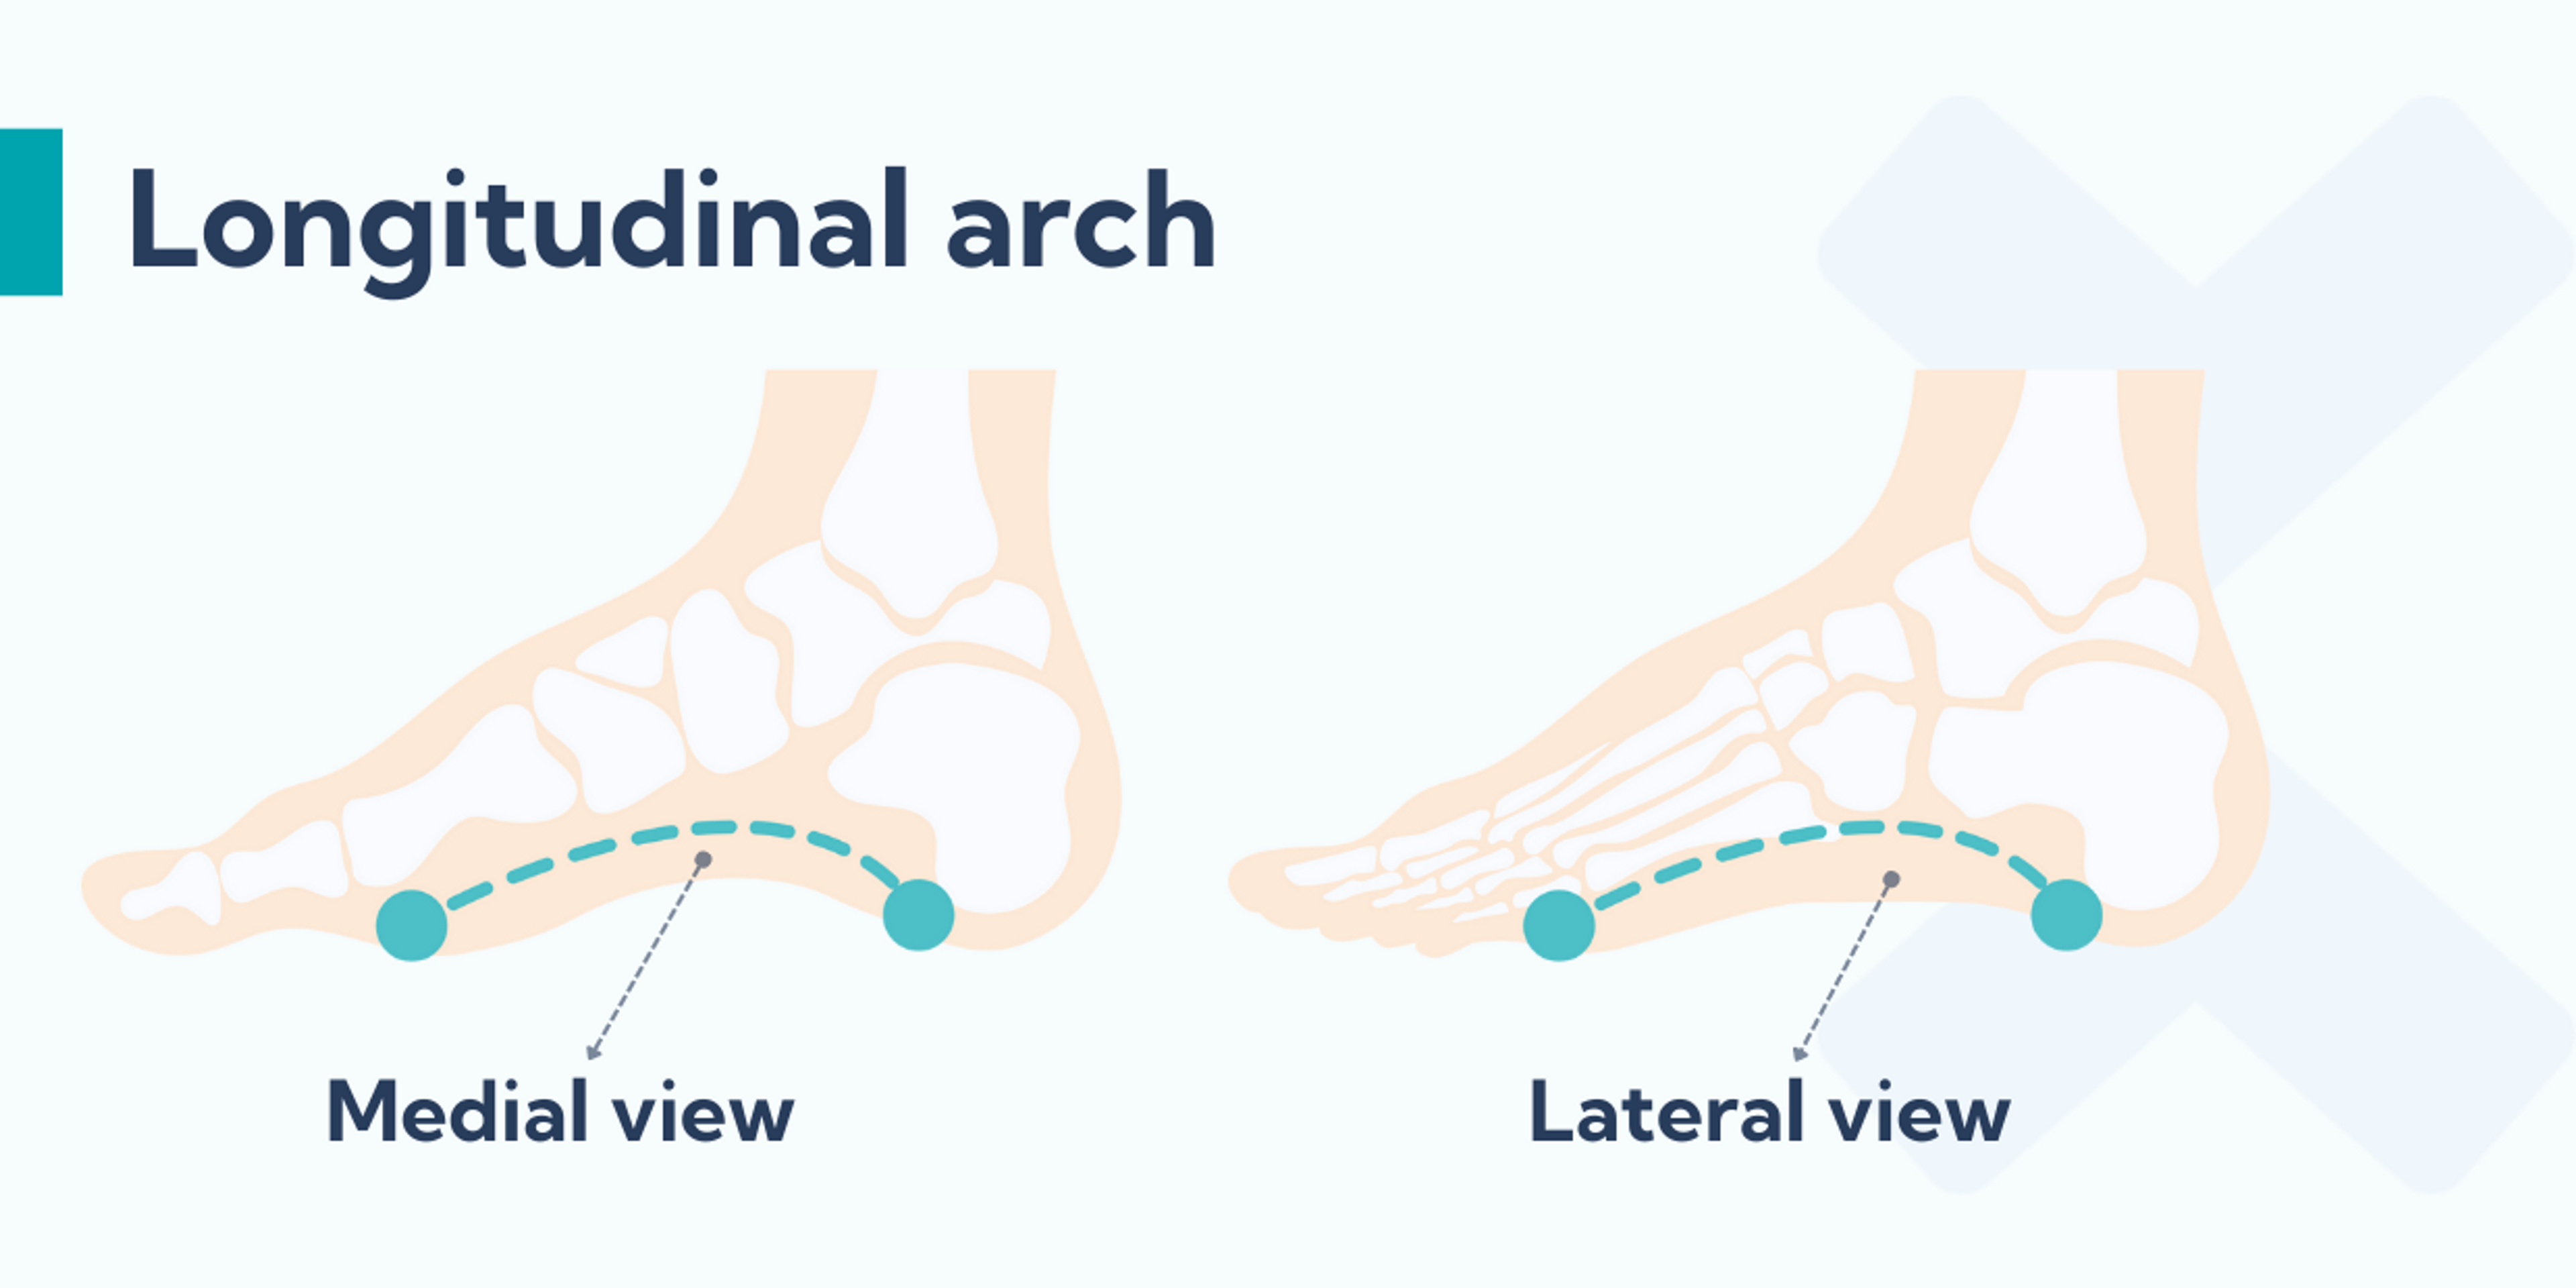 The lateral longitudinal foot arch runs on the outside of the foot and the medial longitudinal arch runs on the inside of the foot.